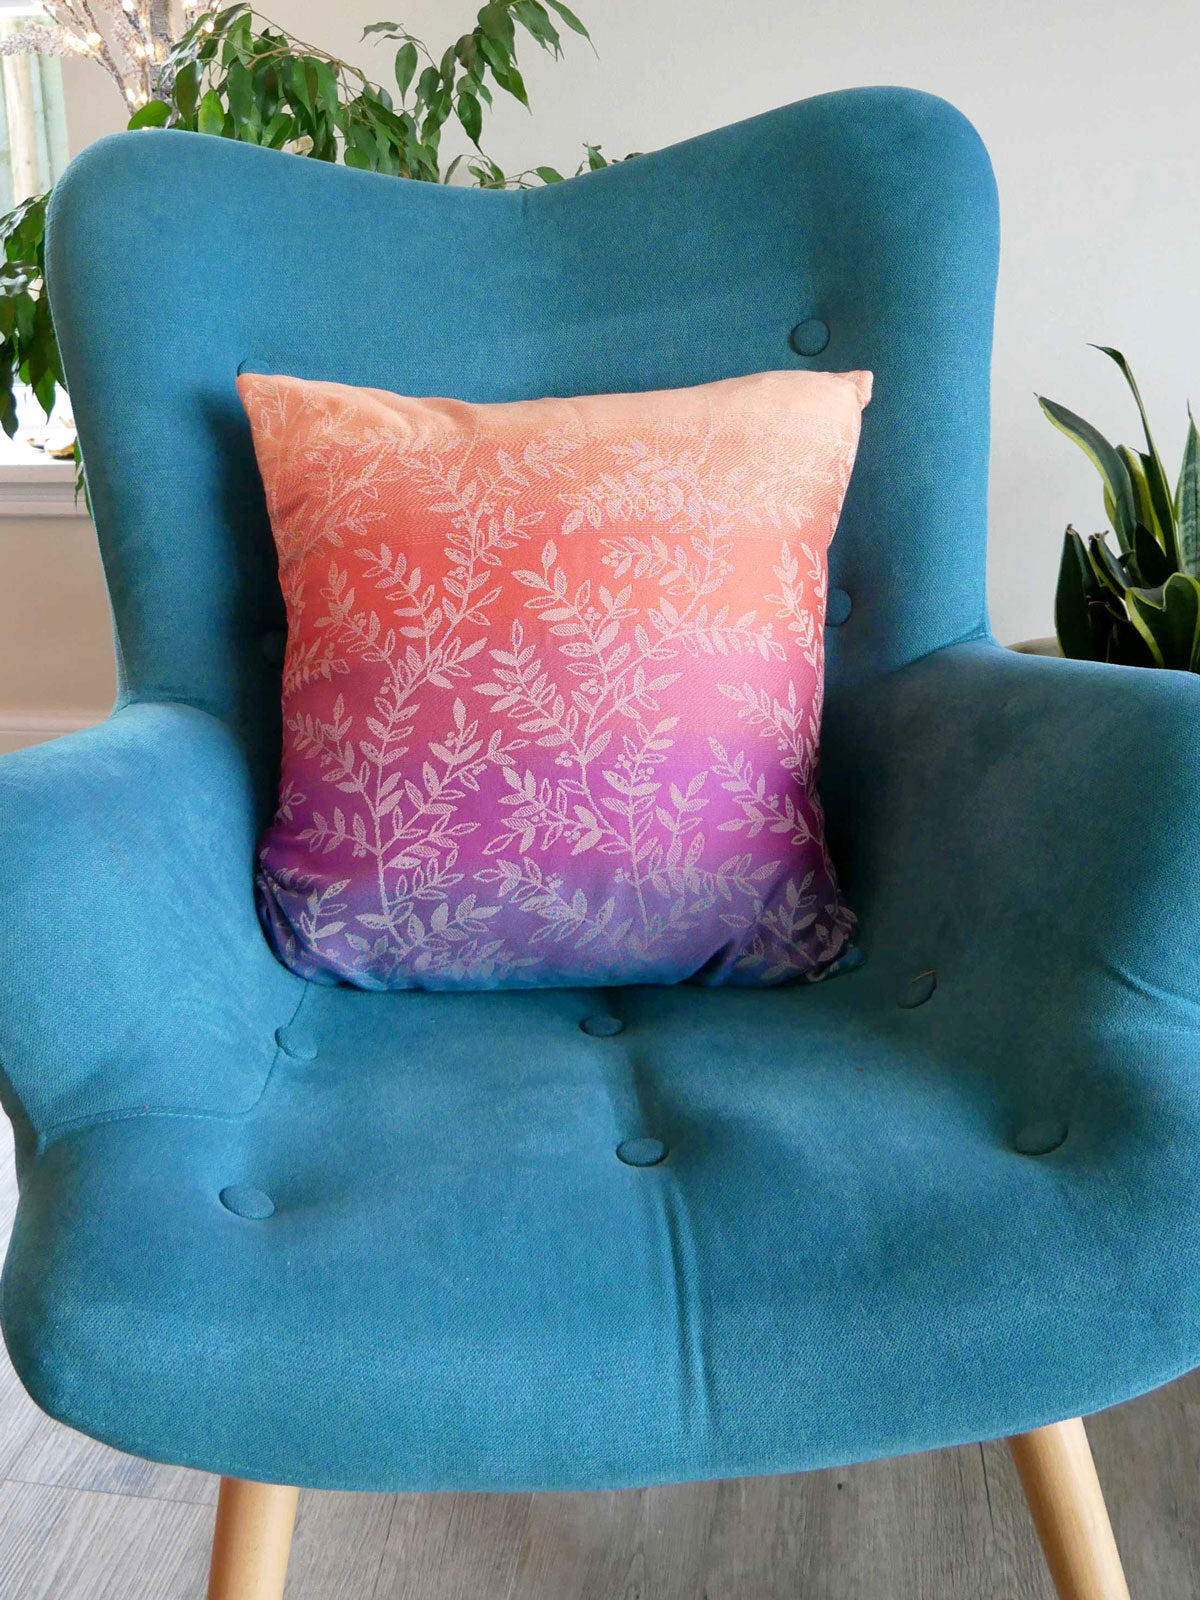 Willow Esprit Cushion Cover